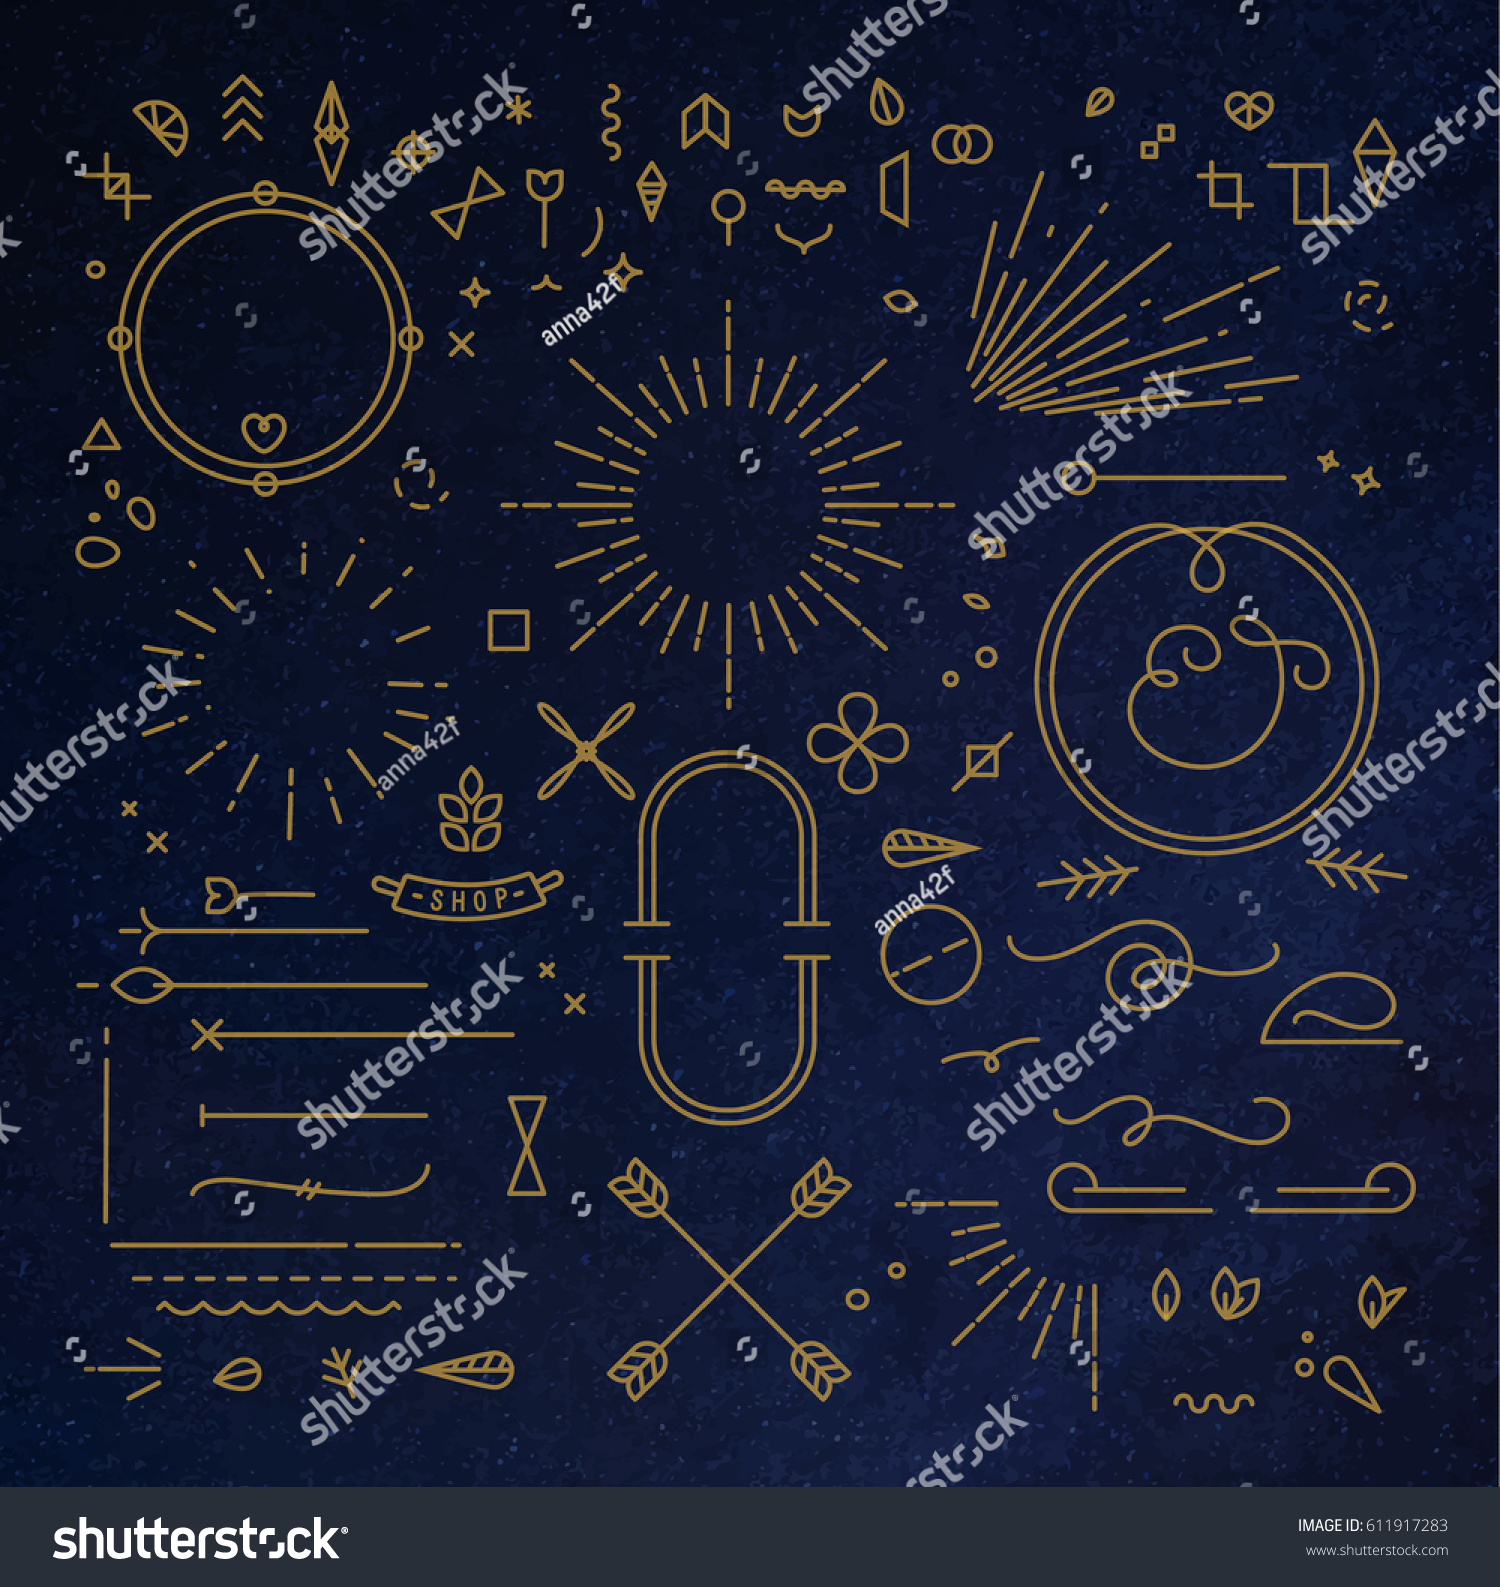 Flat design elements in vintage style drawing with gold lines on blue background #611917283